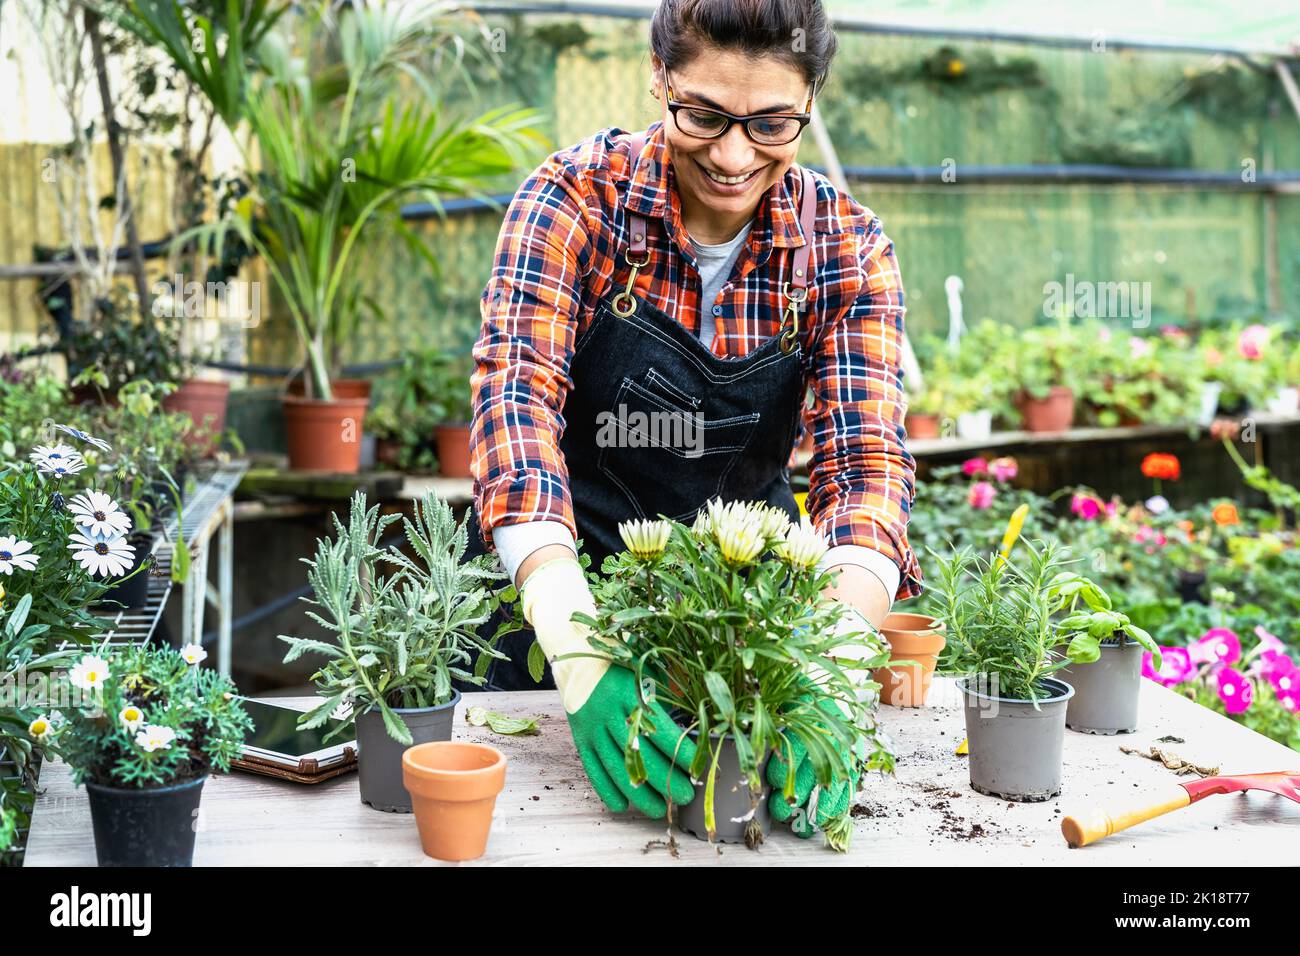 Happy Hispanic woman working in plants and flowers garden shop Stock Photo